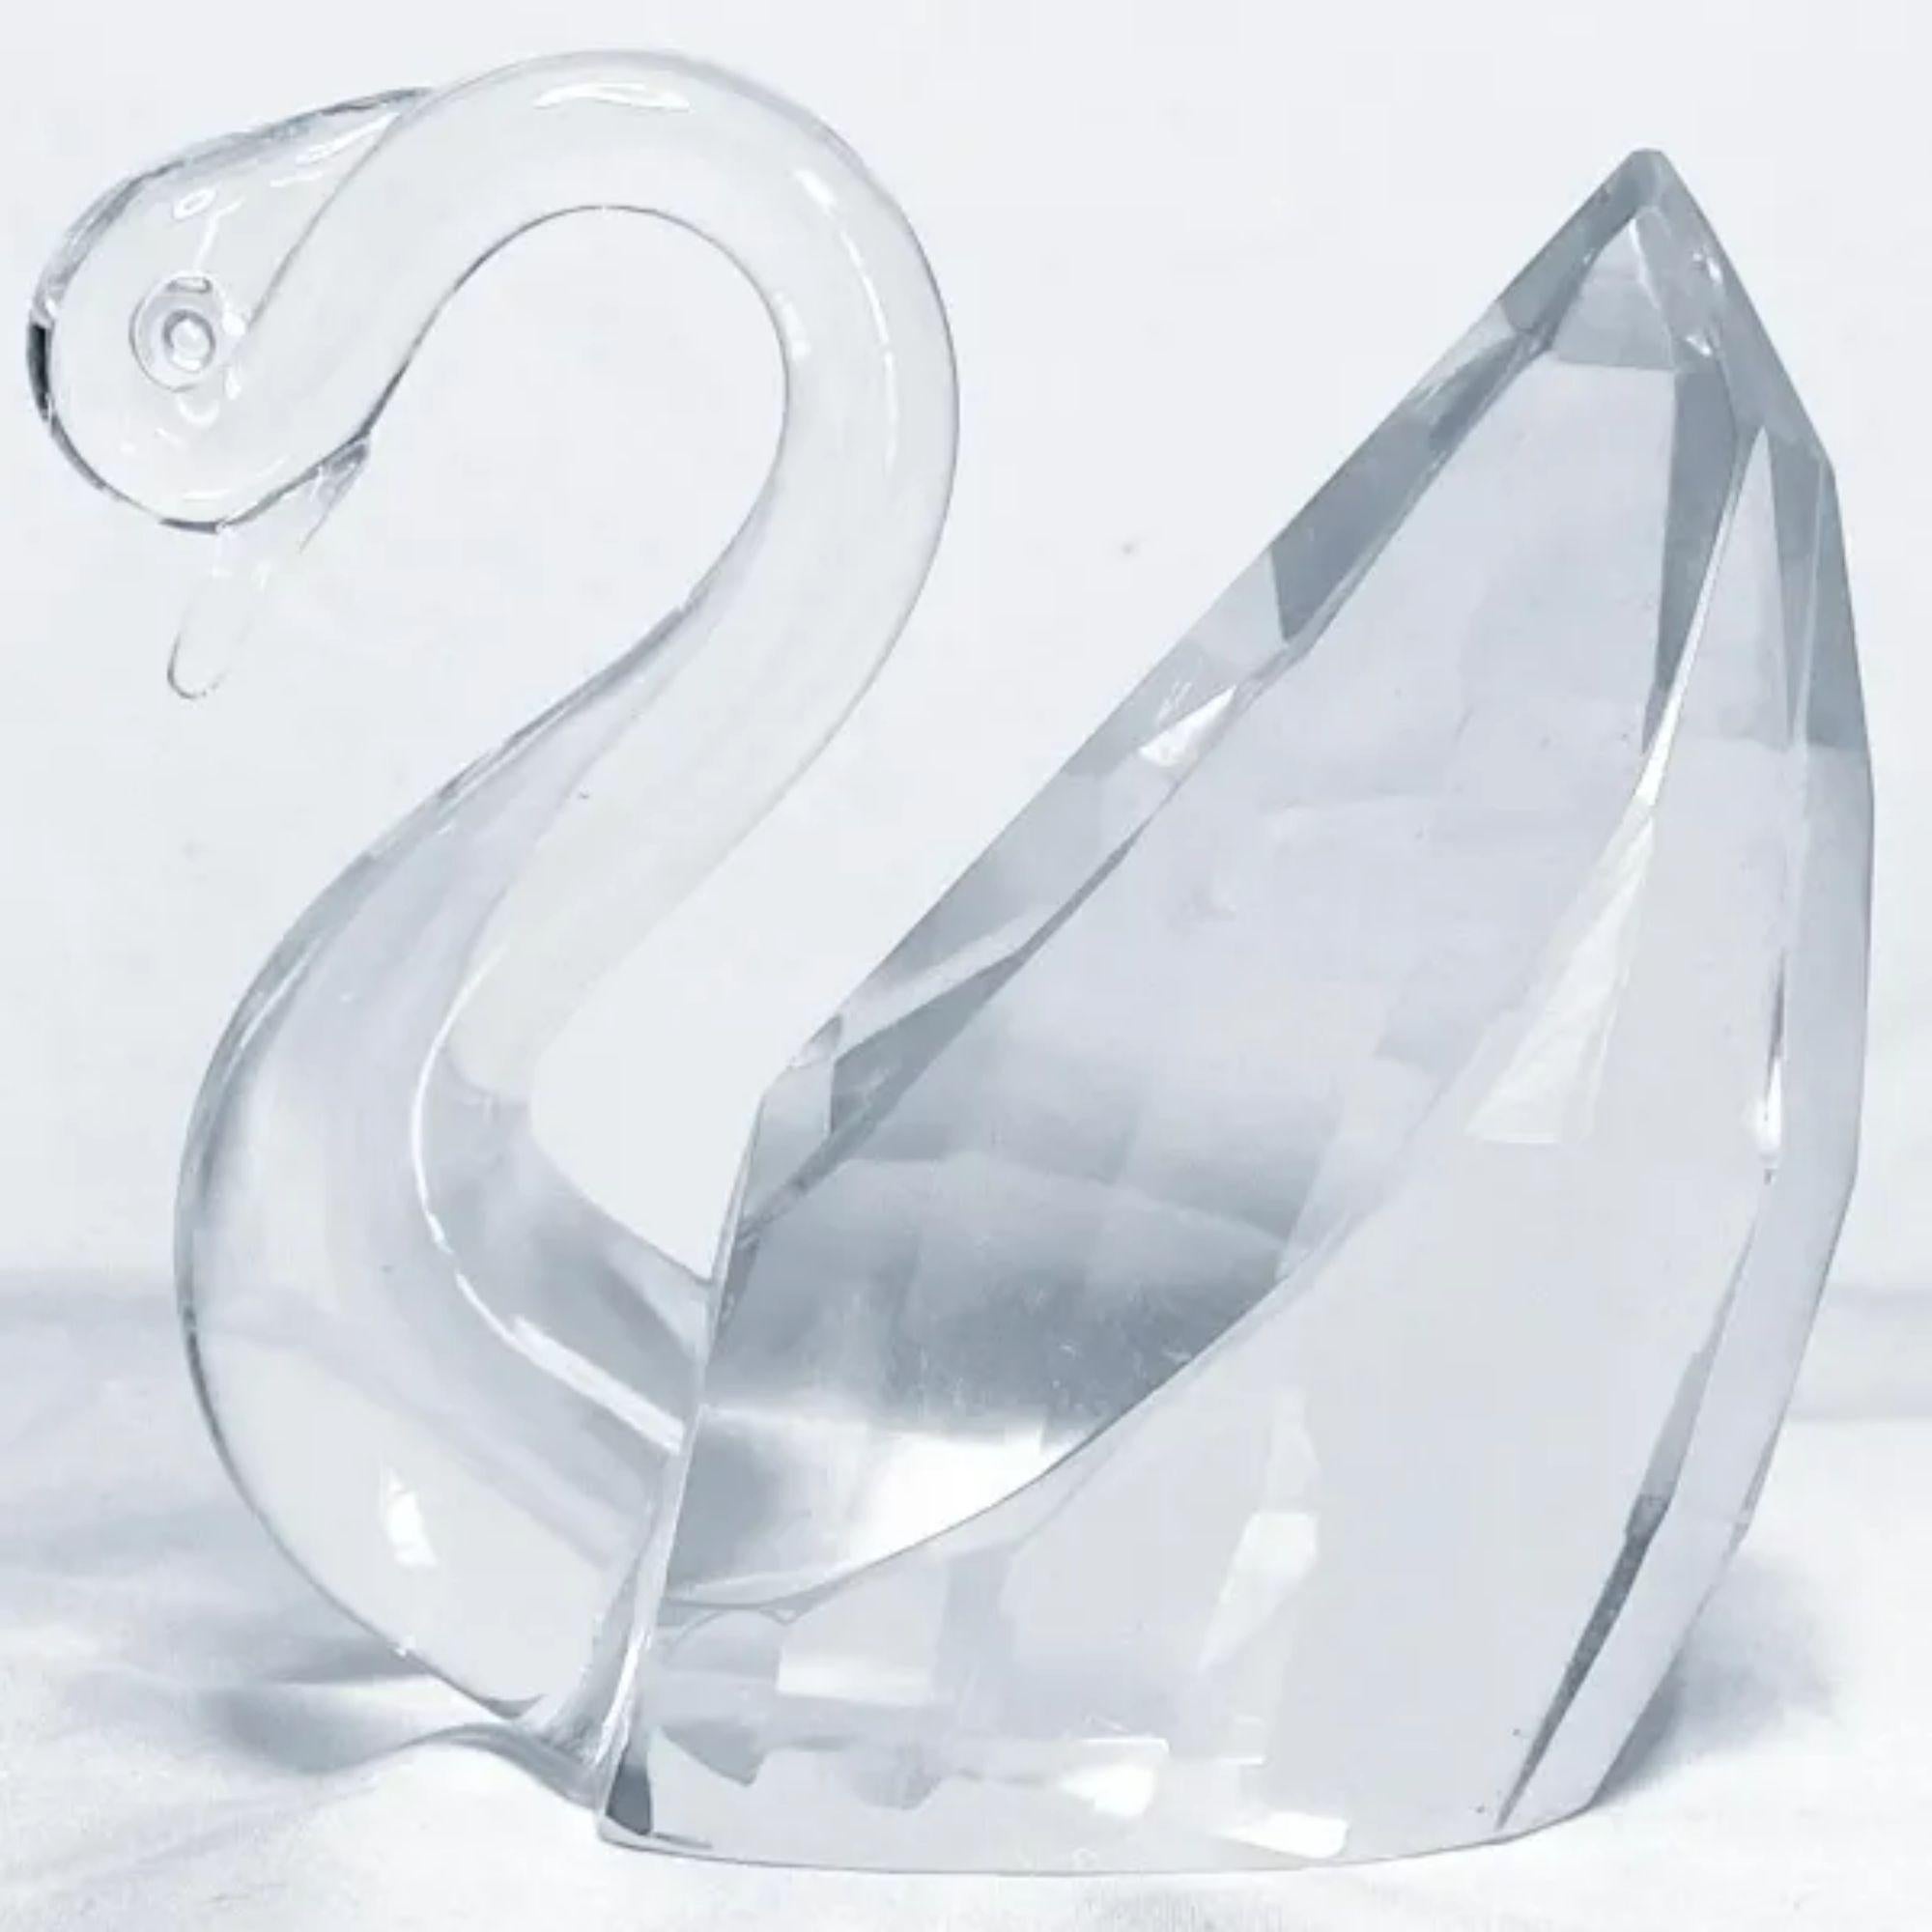 Crystal Swan Paperweight by Shannon Crystal Designs

Additional information: 
Material: Crystal, Glass
Color: Transparent
Style: Postmodern, Vintage
Brand: Shannon Crystal Designs of Ireland
Time Period: 1980s
Place of origin: China
Dimension: 4.5